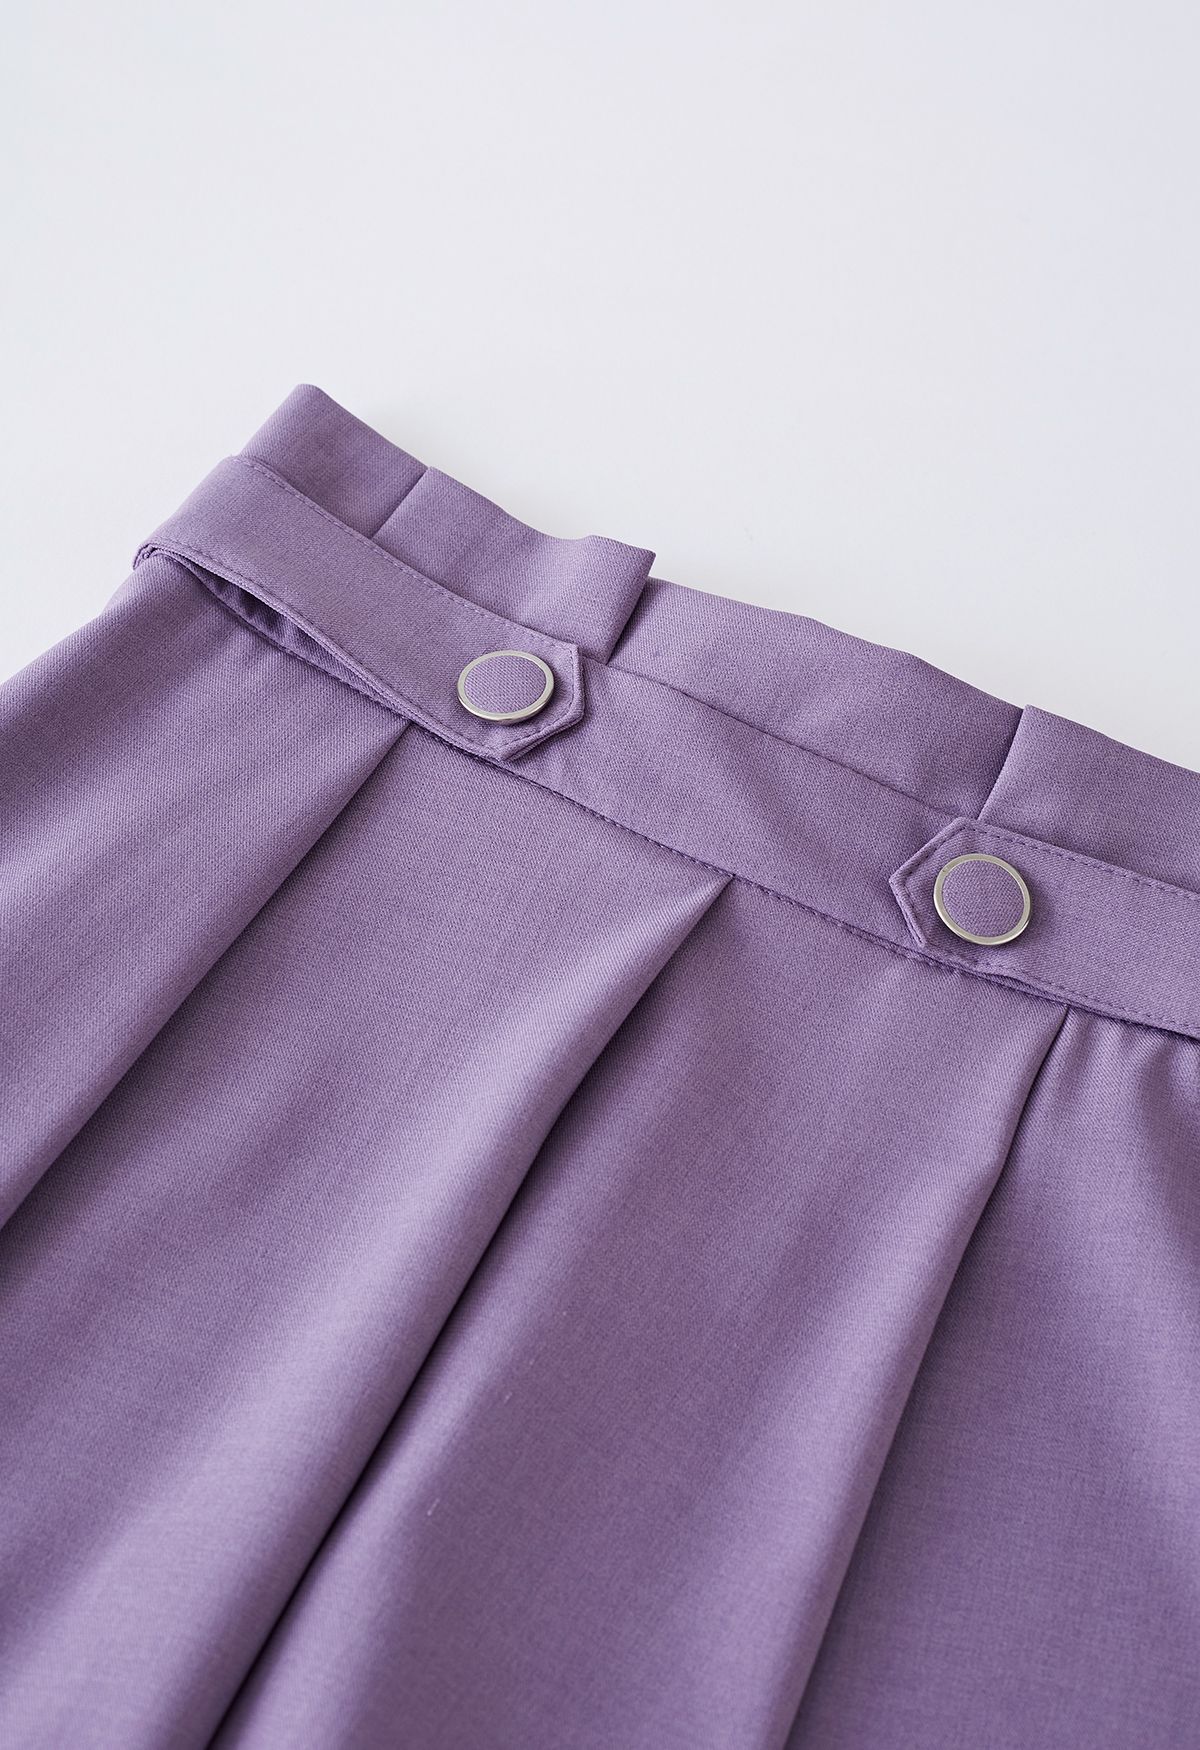 Pleated Buttoned Waist A-Line Midi Skirt in Lilac